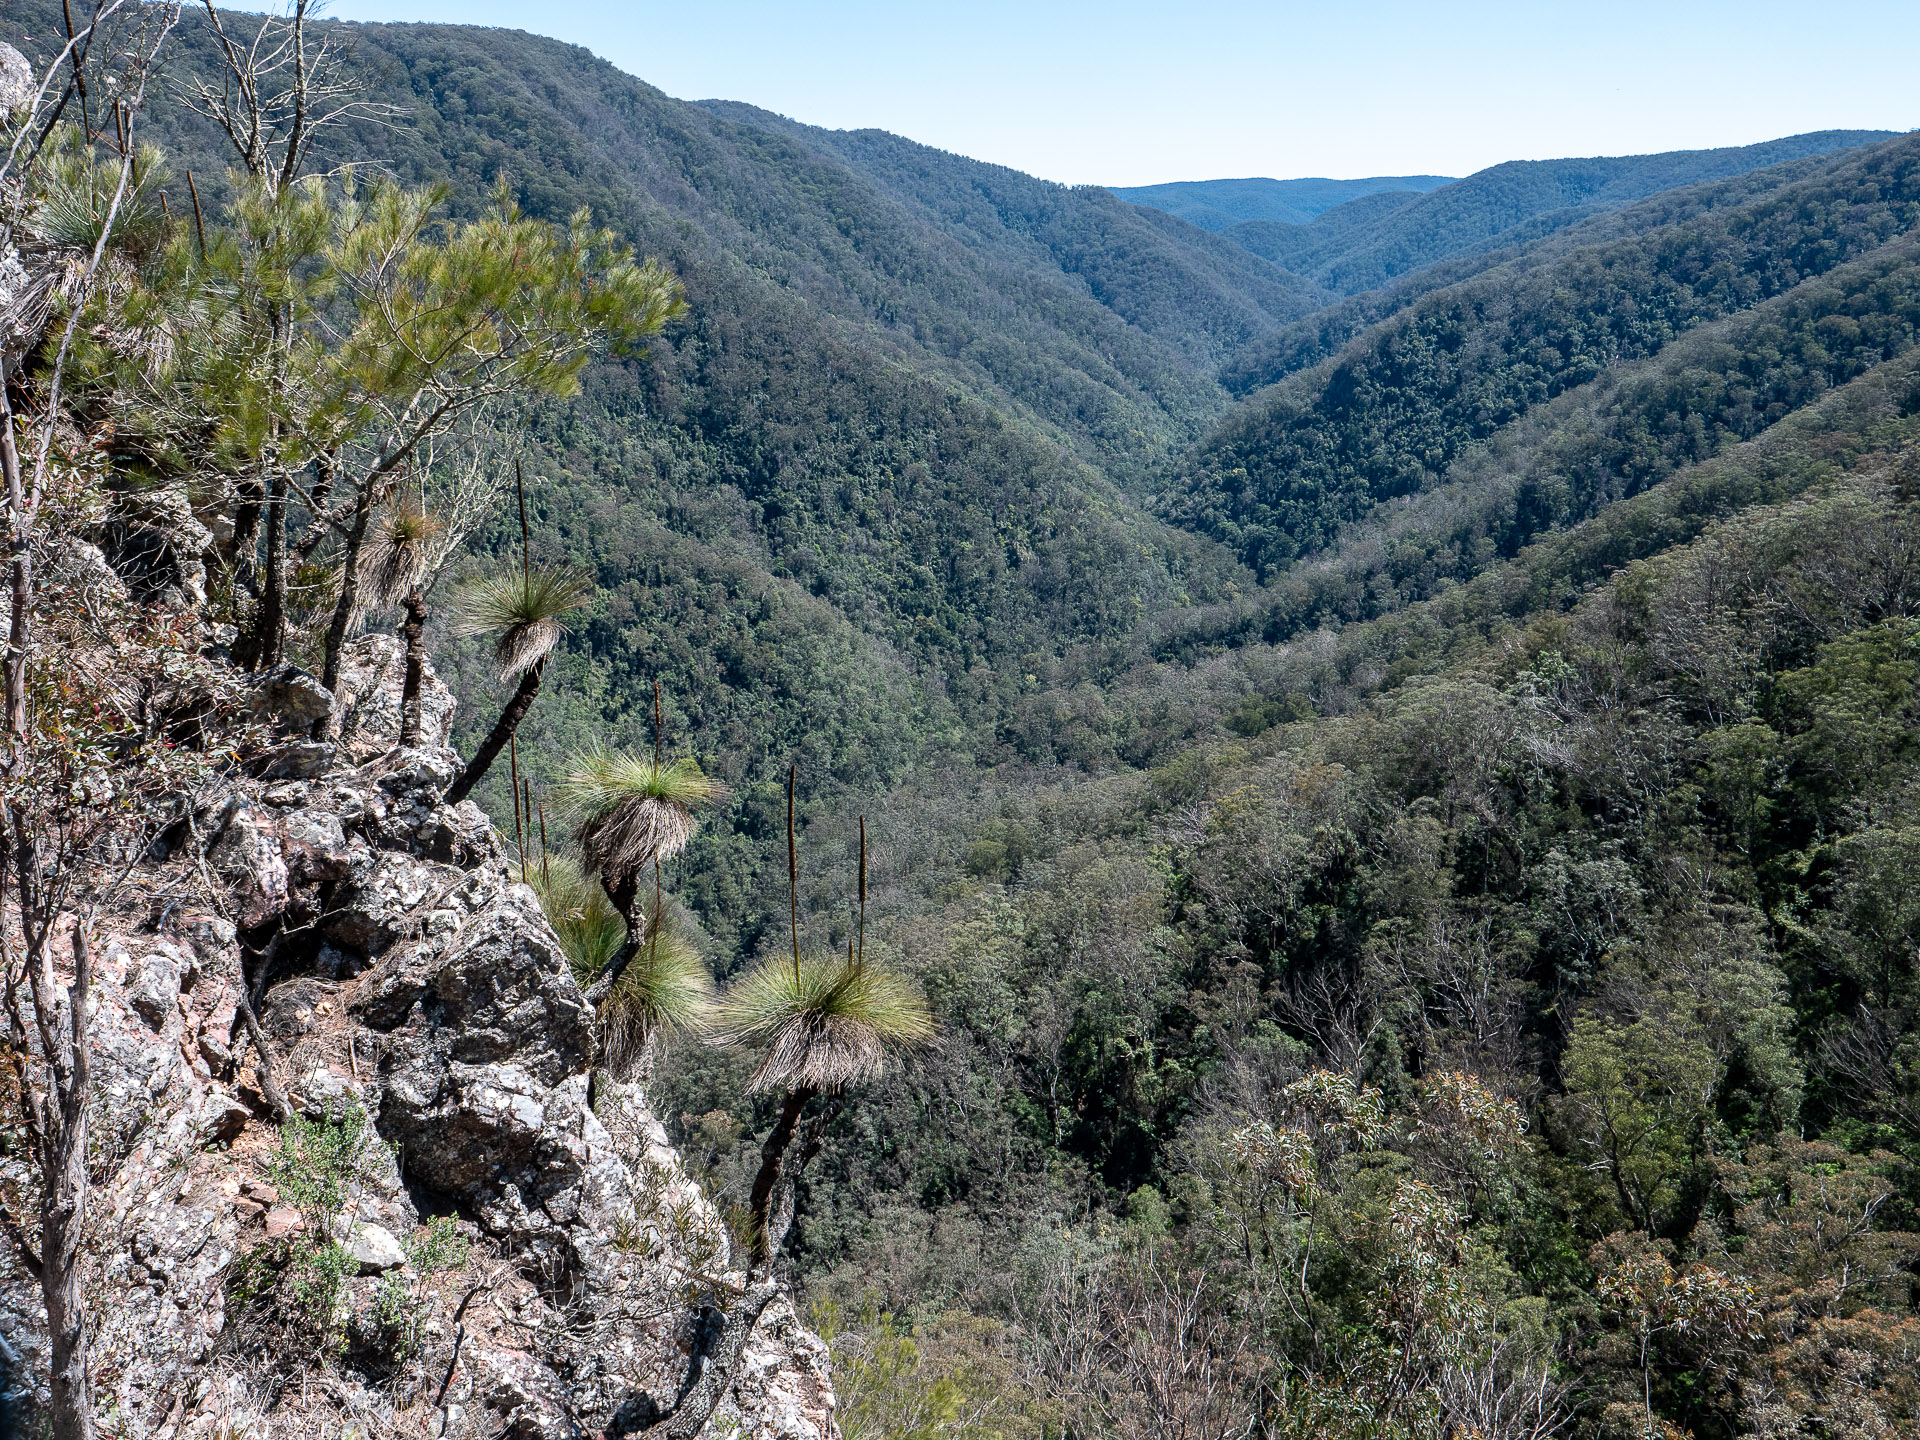 Looking back into magical Myall Creek from the ascent spur (image G. Luscombe)